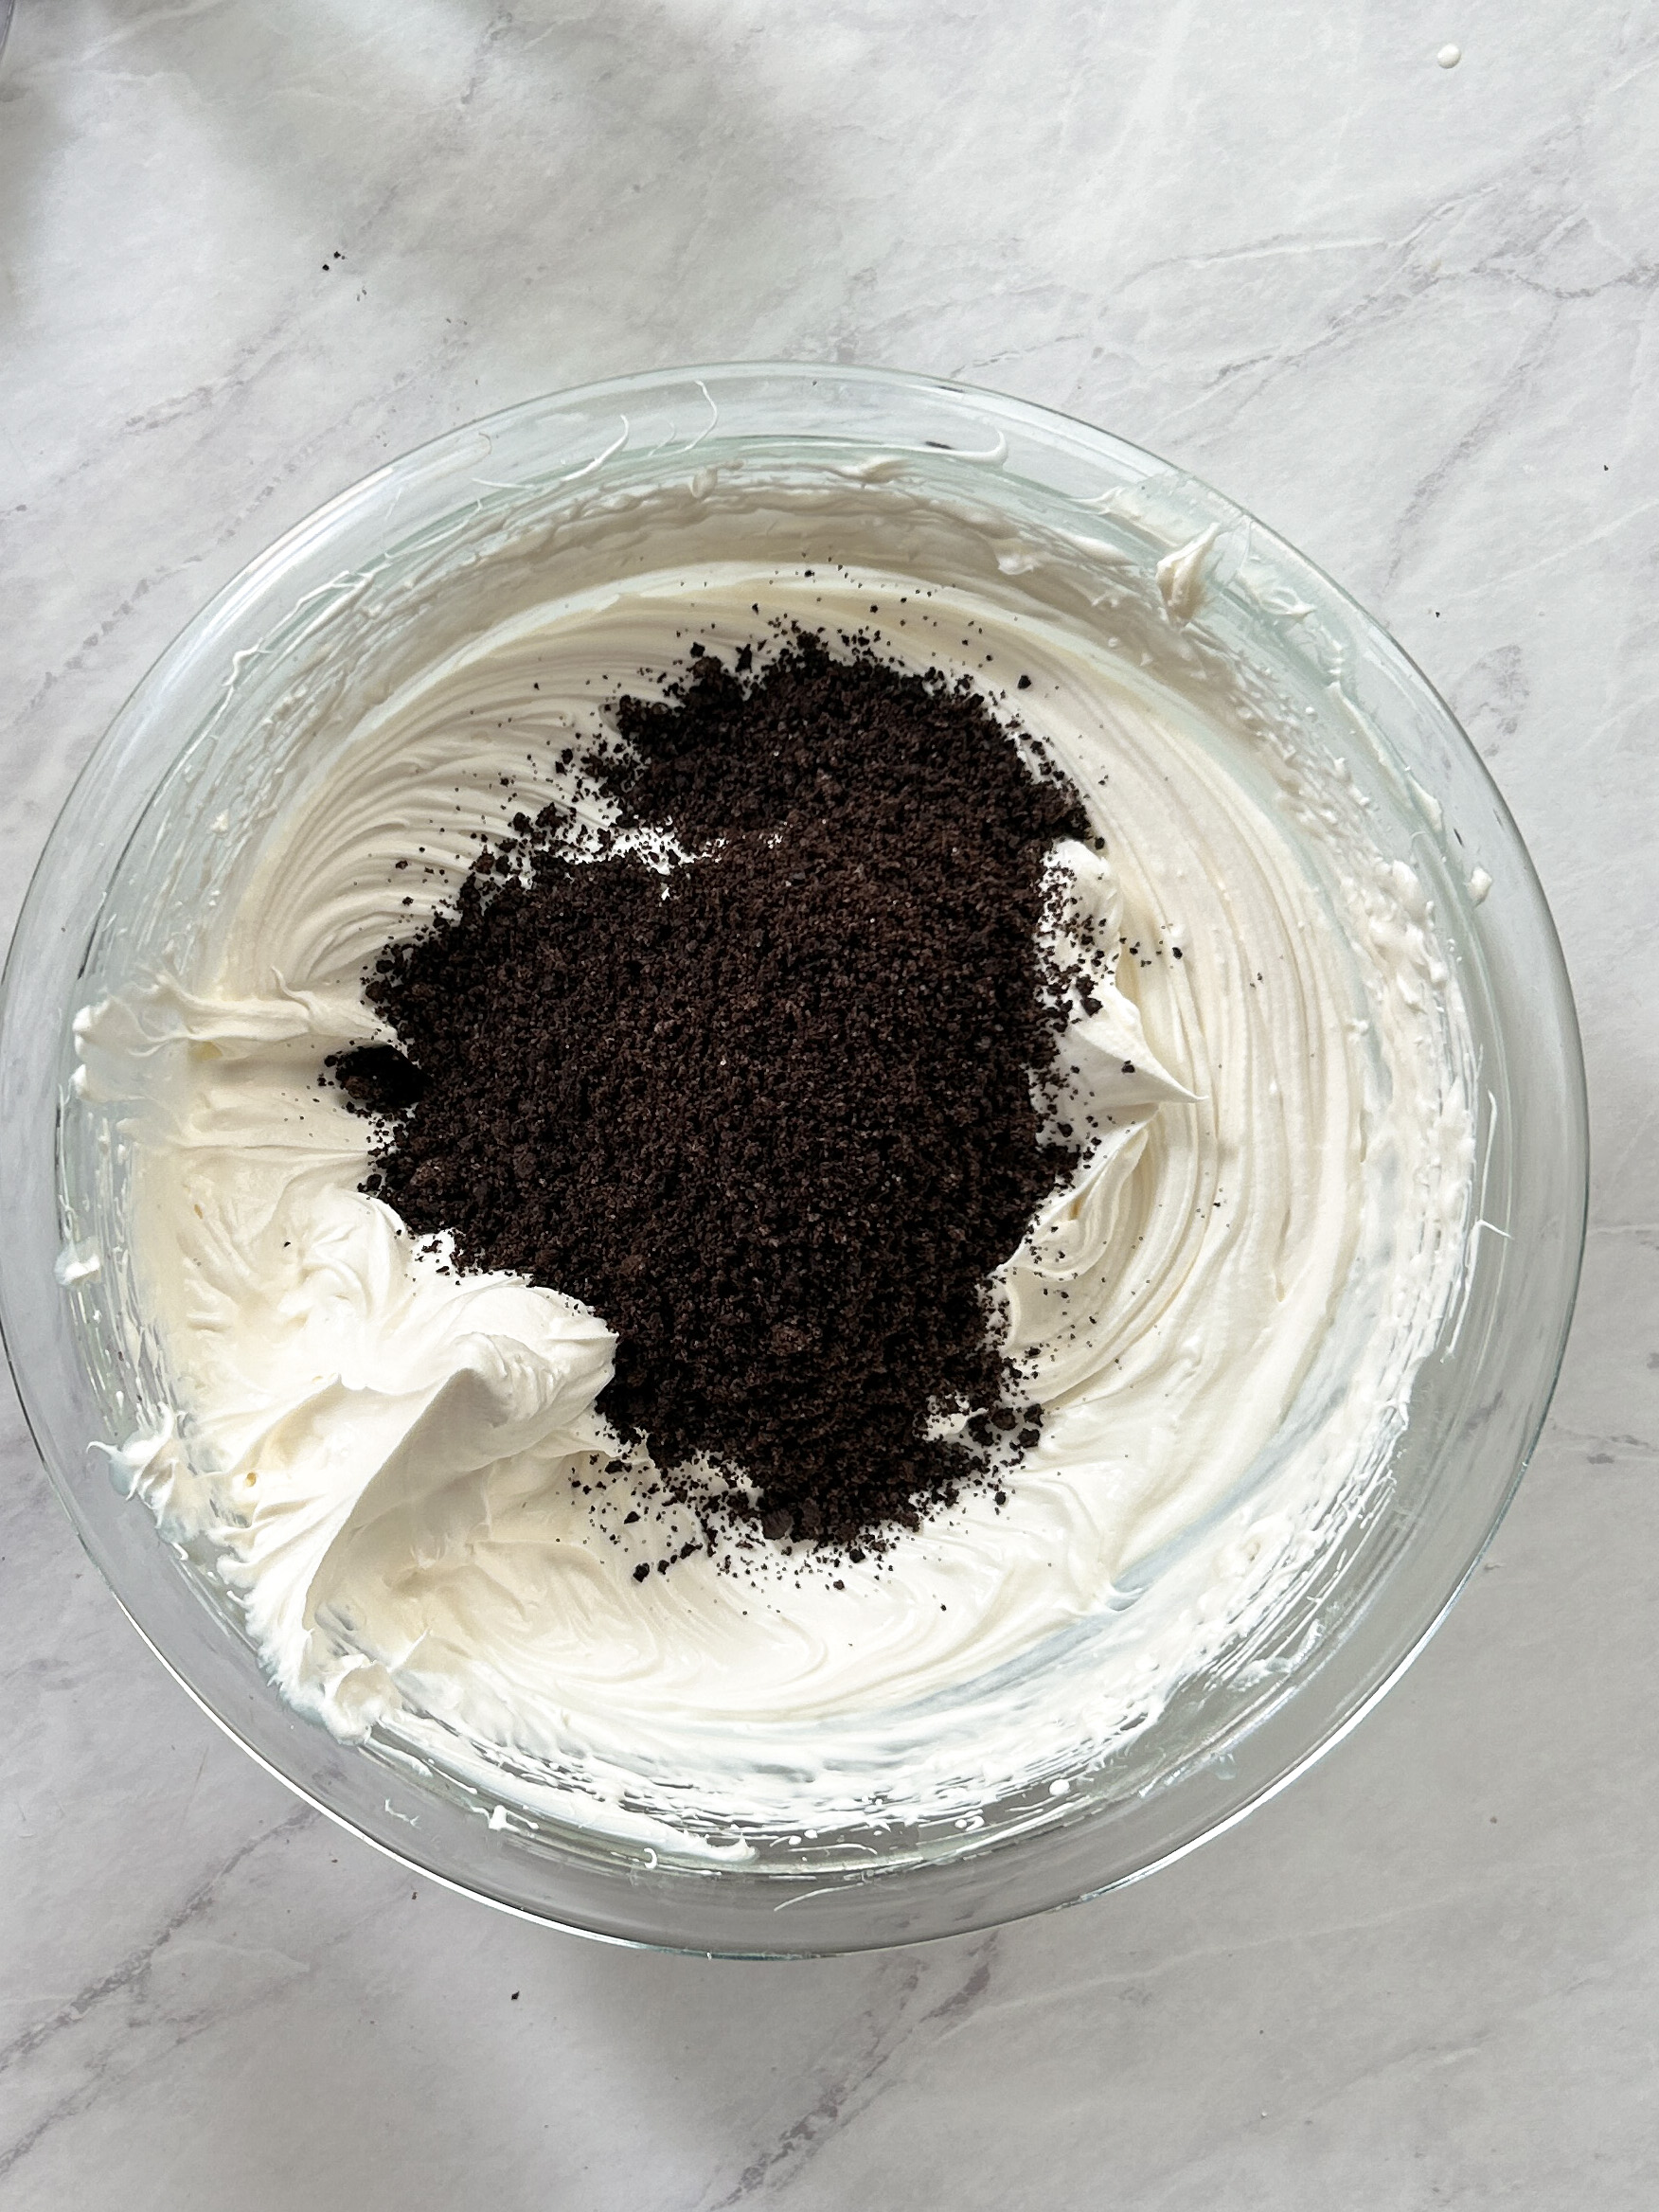 crushed oreo (chocolate cream) cookies on top of whipped cream in a glass bowl